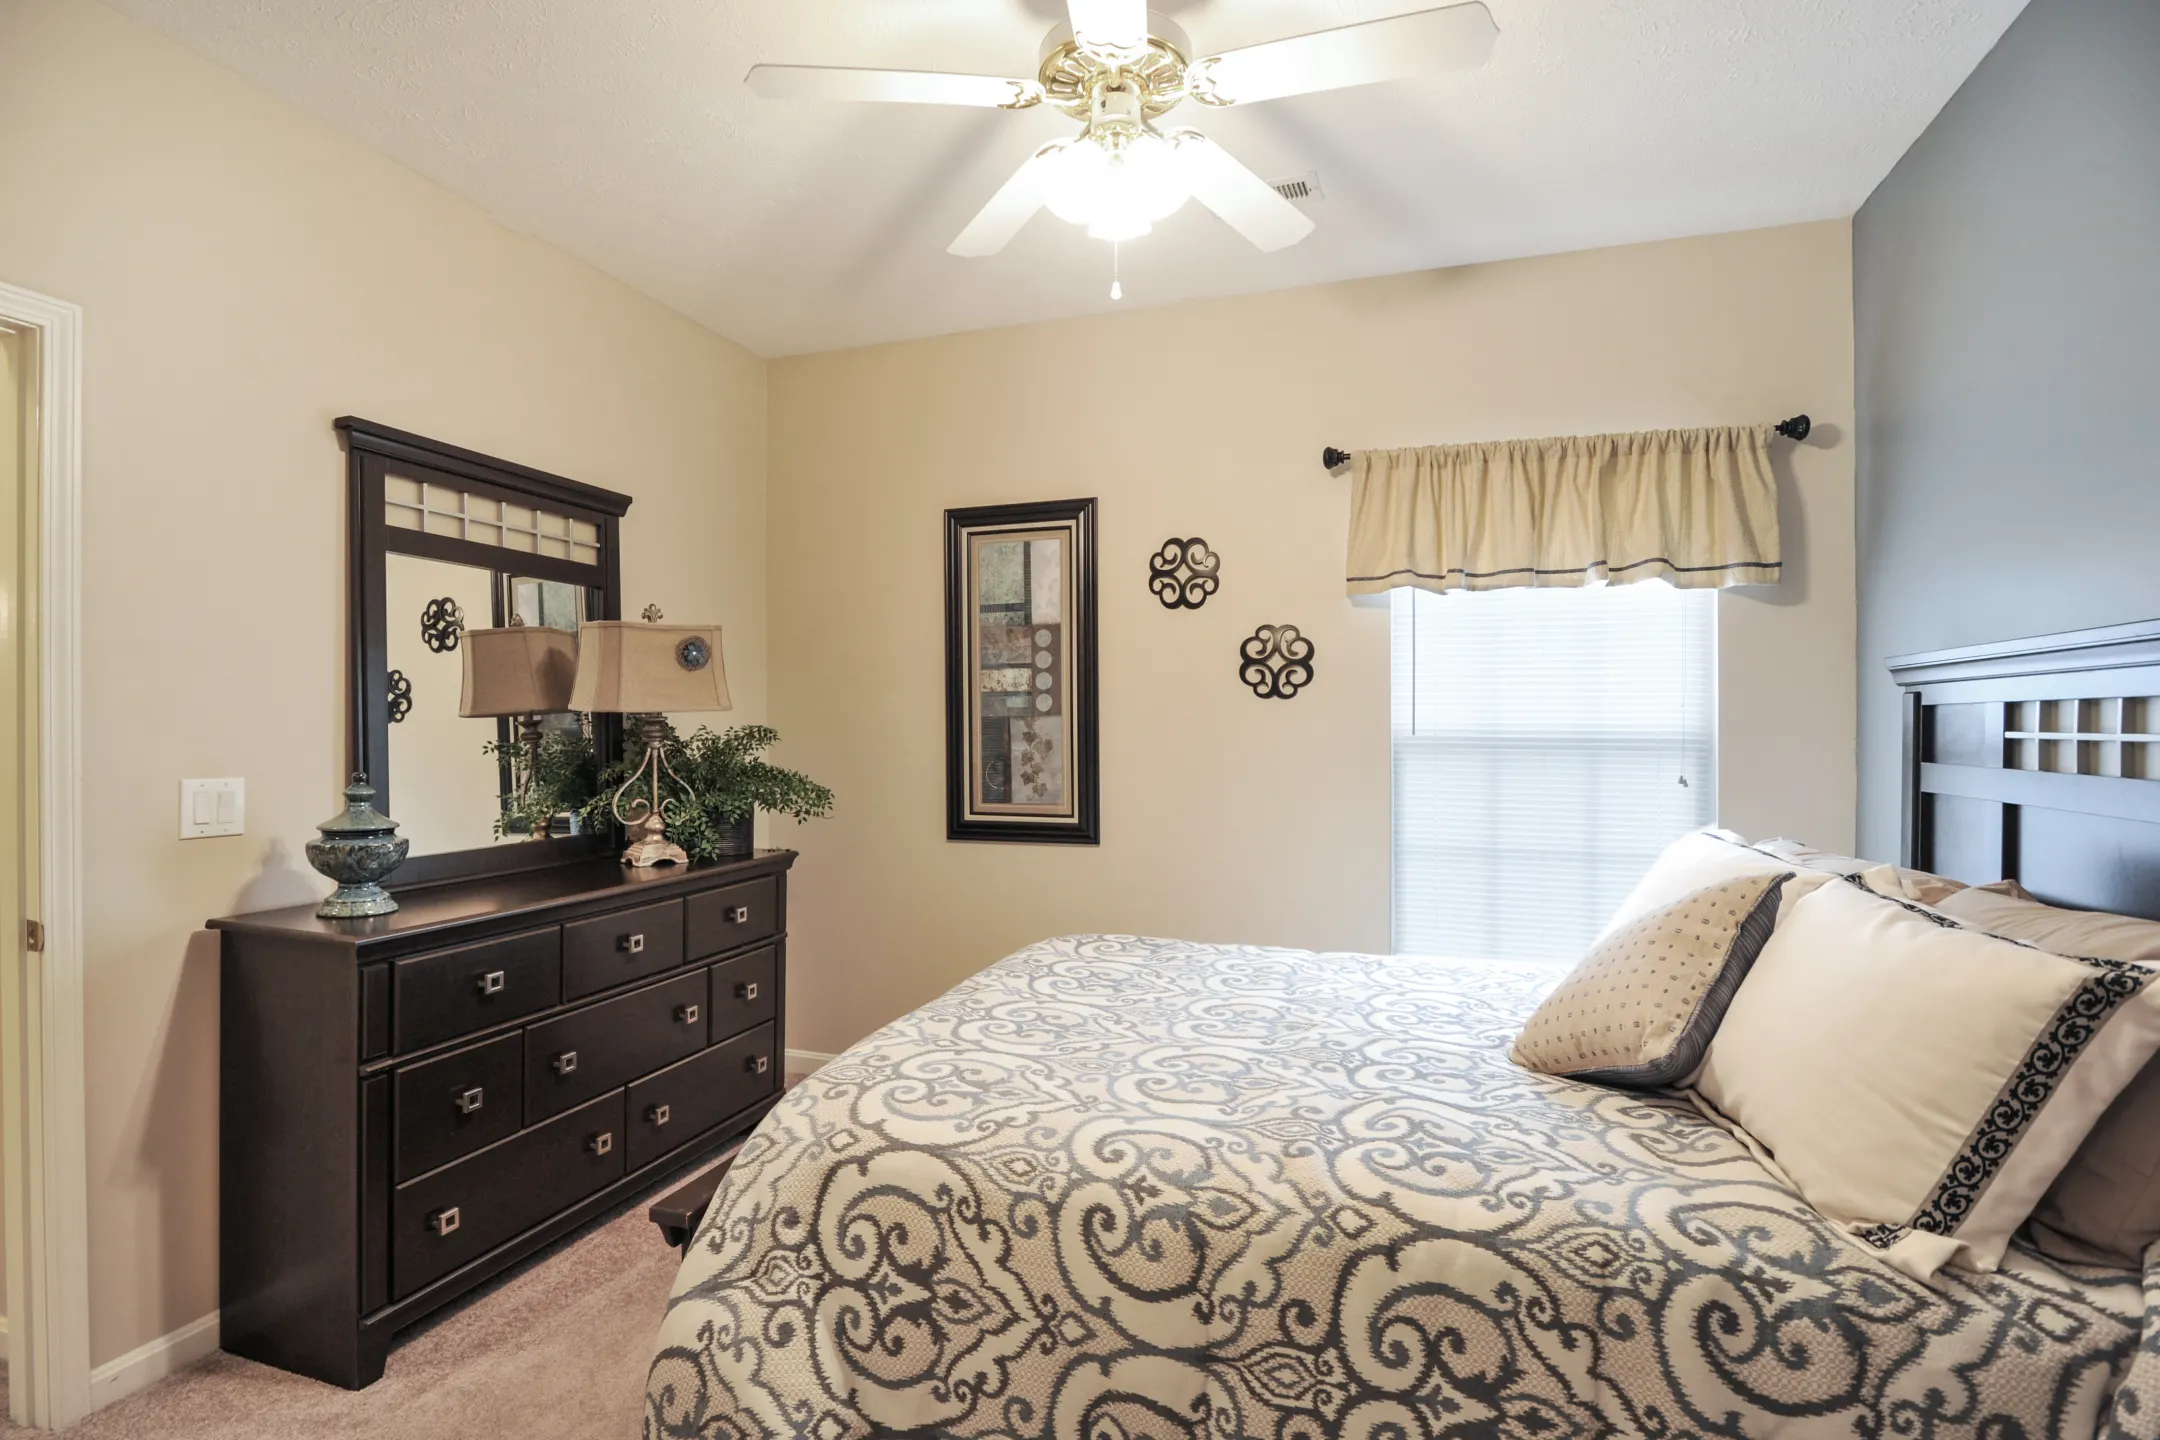 Bedroom - Lighthouse Apartments At Pebble Creek - Jeffersonville, IN